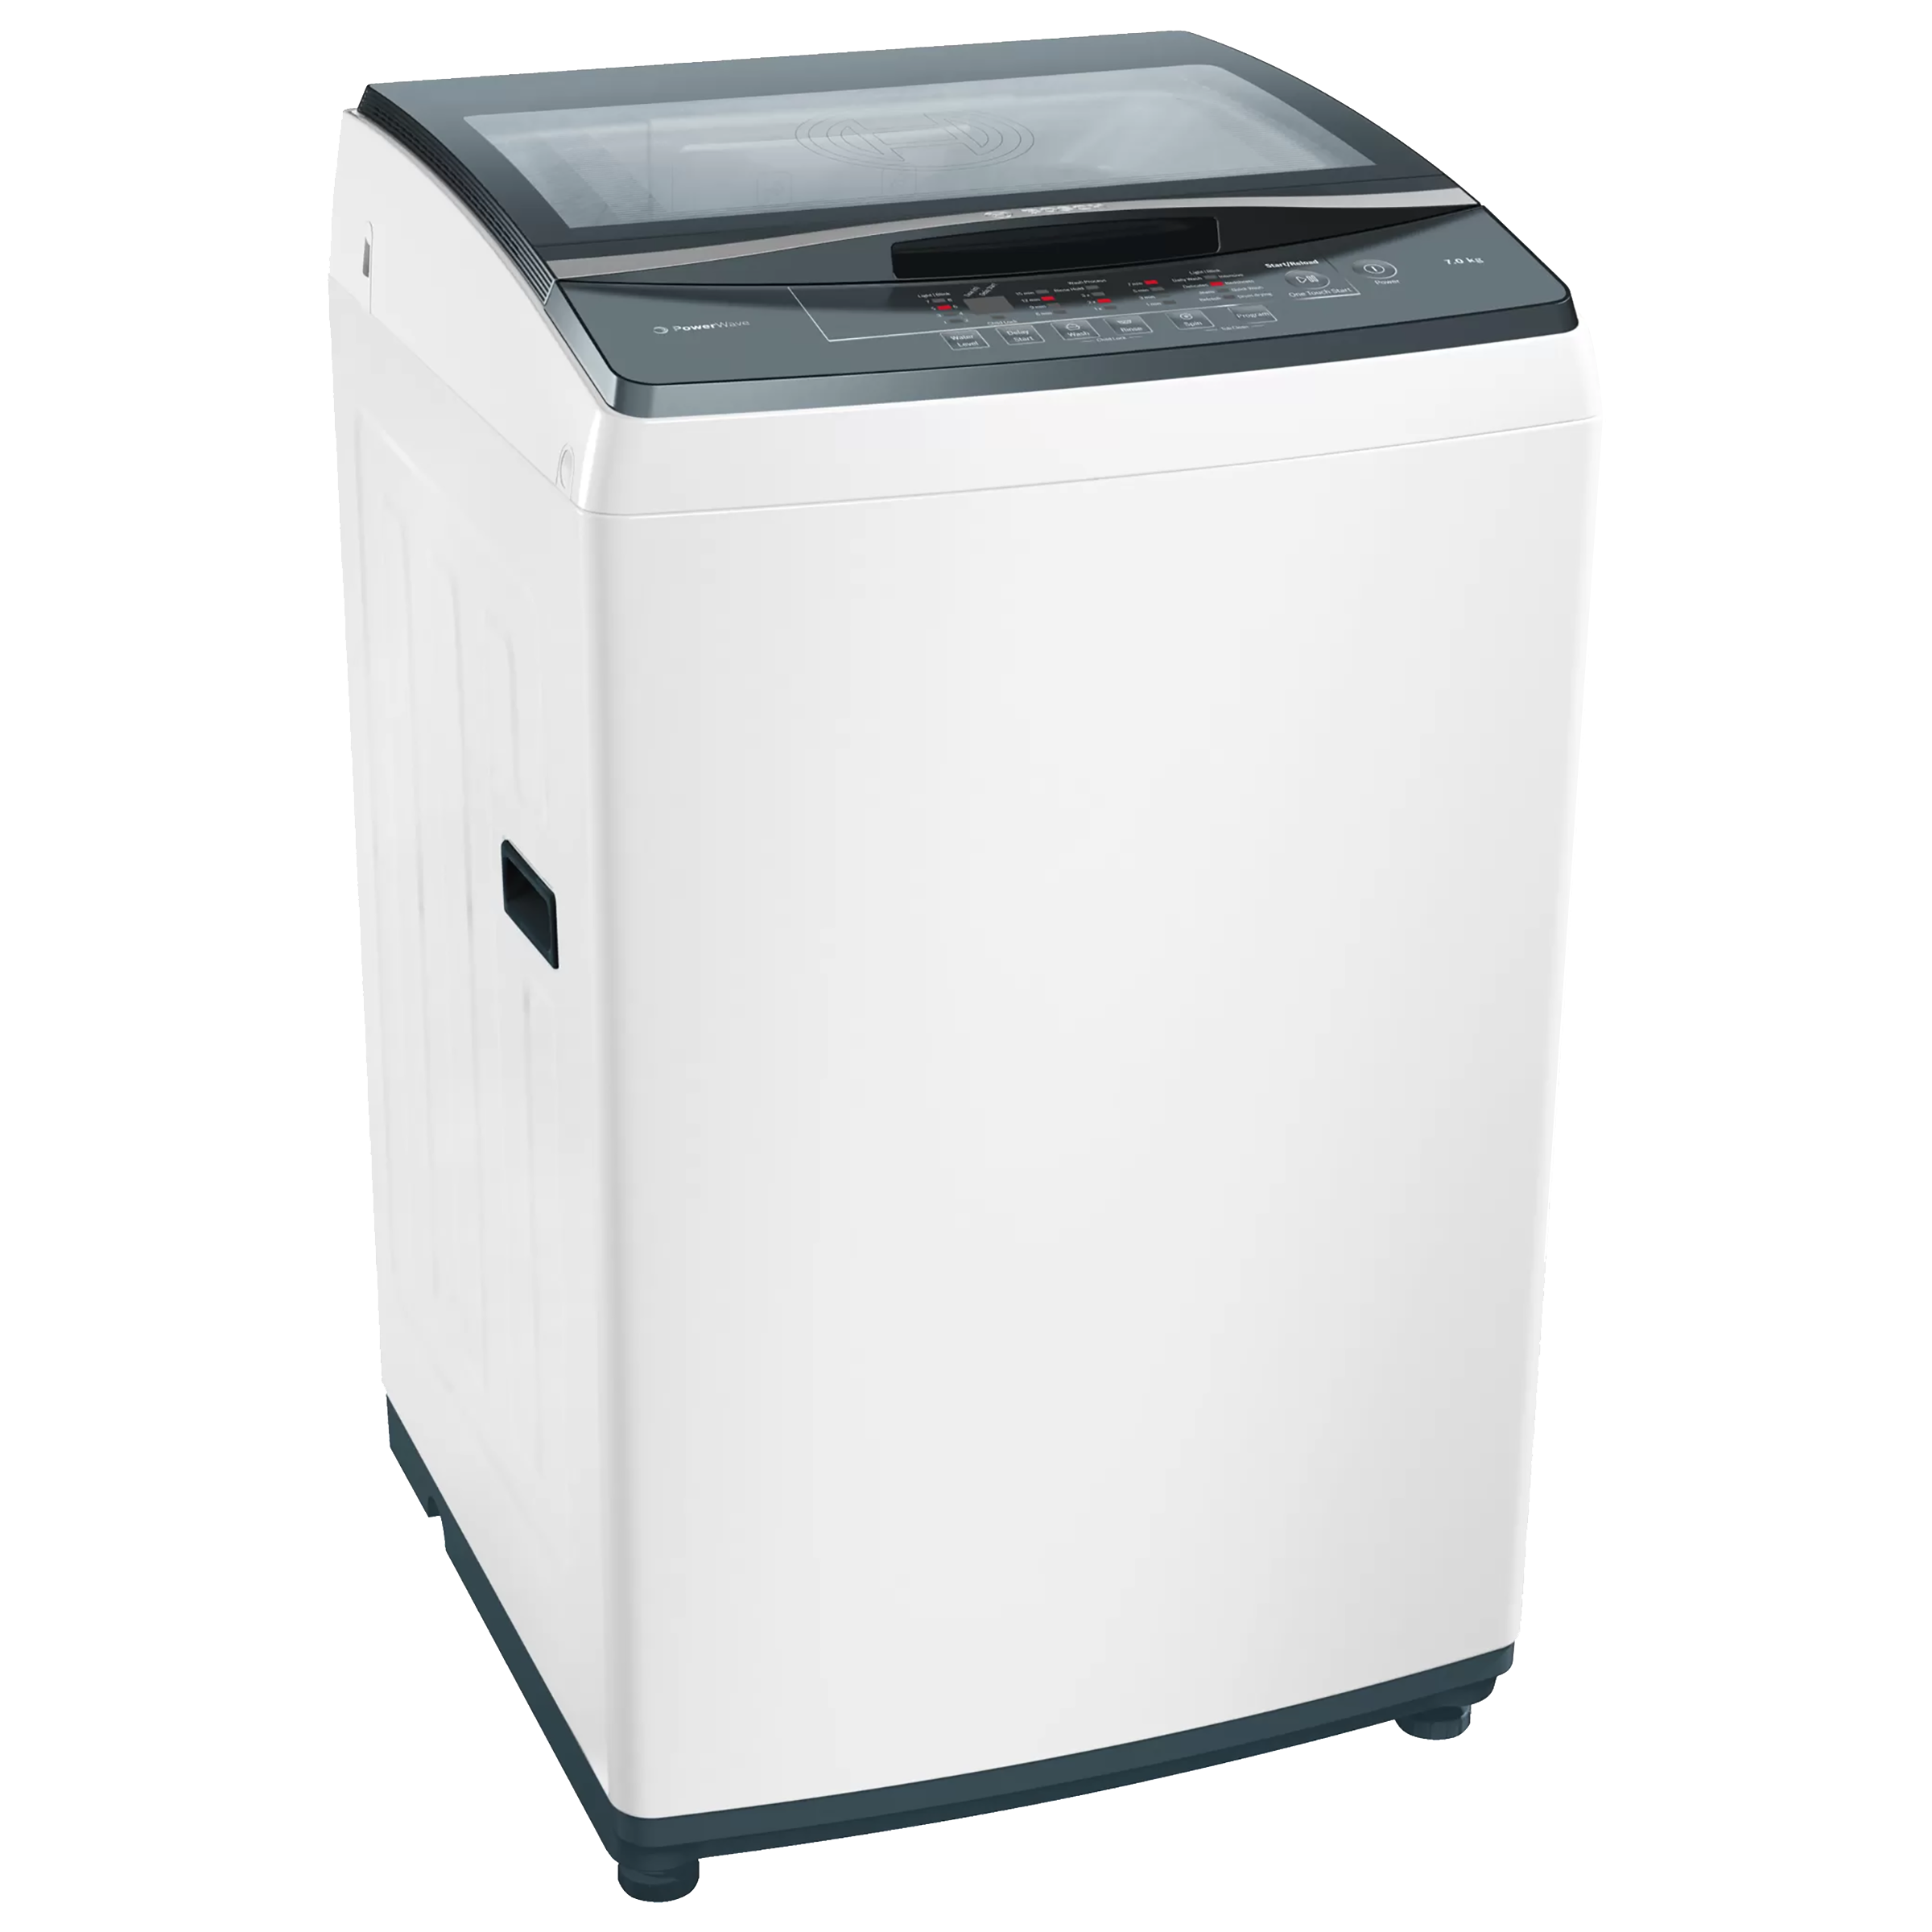 Bosch Serie 4 7 kg 5 Star Fully Automatic Top Load Washing Machine (EcoSilence Drive Friction-Free Motor, WOE704W1IN, White)_1